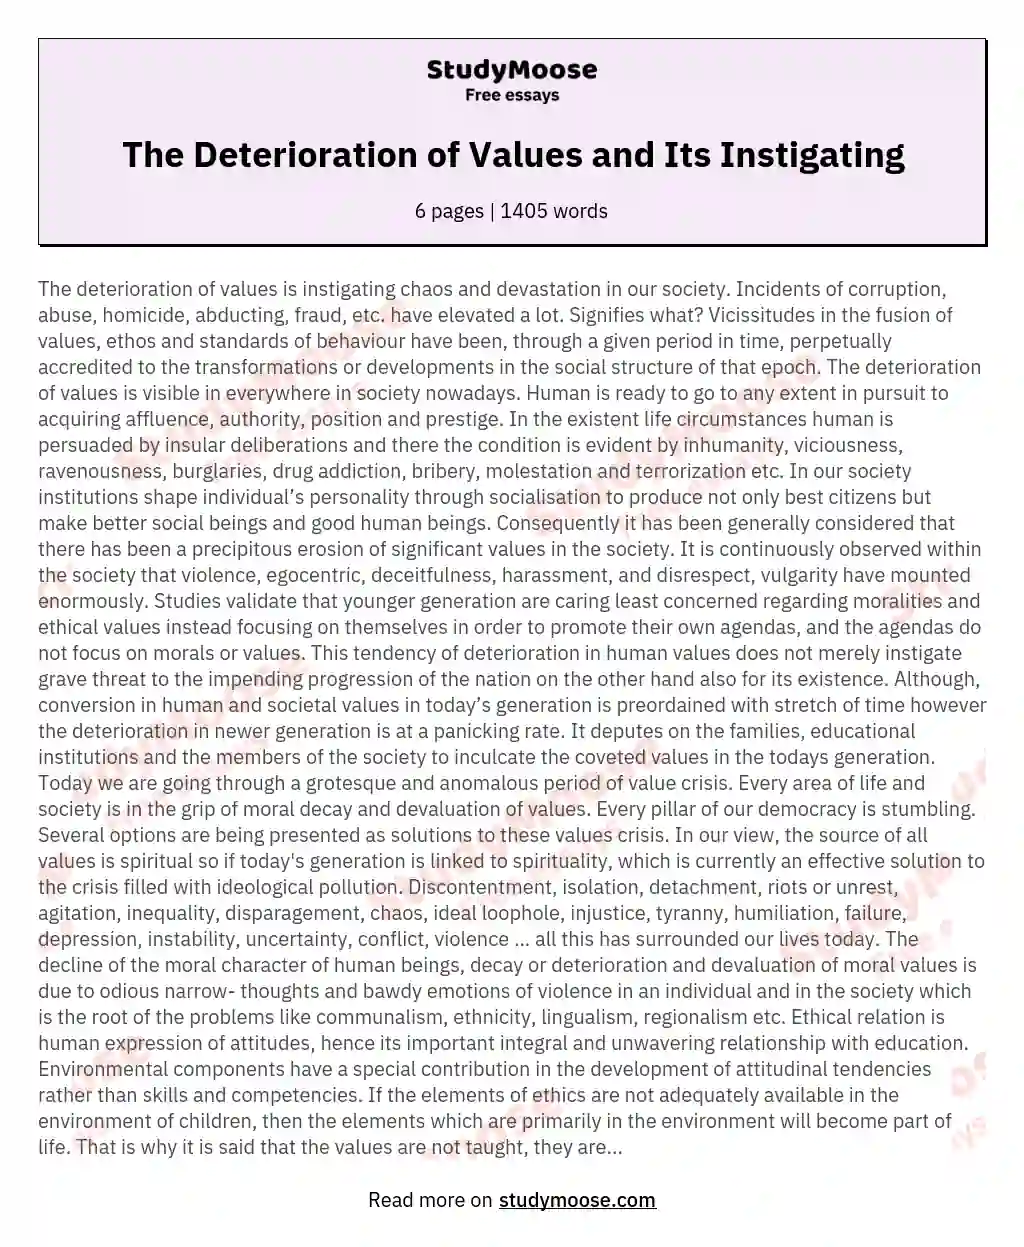 The Deterioration of Values and Its Instigating essay